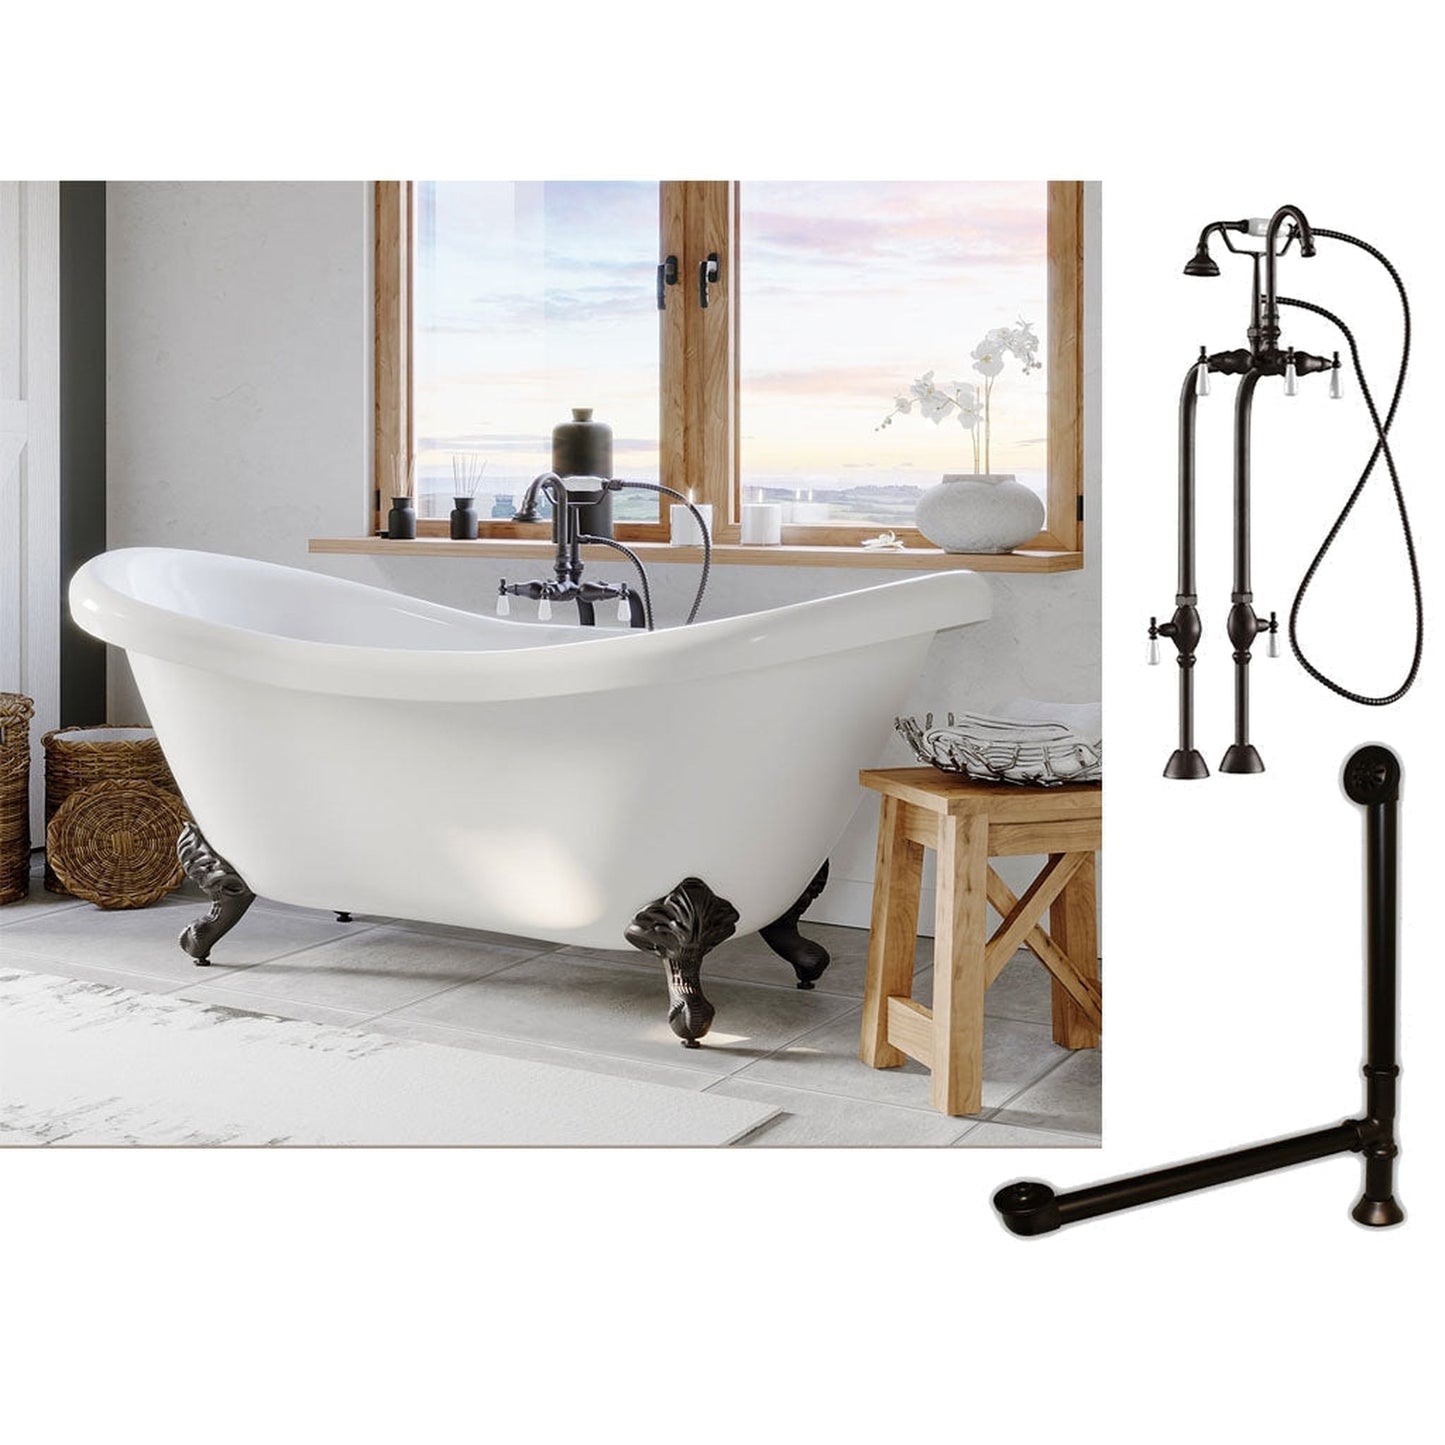 Cambridge Plumbing 69" White Double Slipper Clawfoot Acrylic Bathtub With No Deck Holes And Complete Plumbing Package Including Freestanding English Telephone Gooseneck Faucet, Drain And Overflow Assembly In Oil Rubbed Bronze